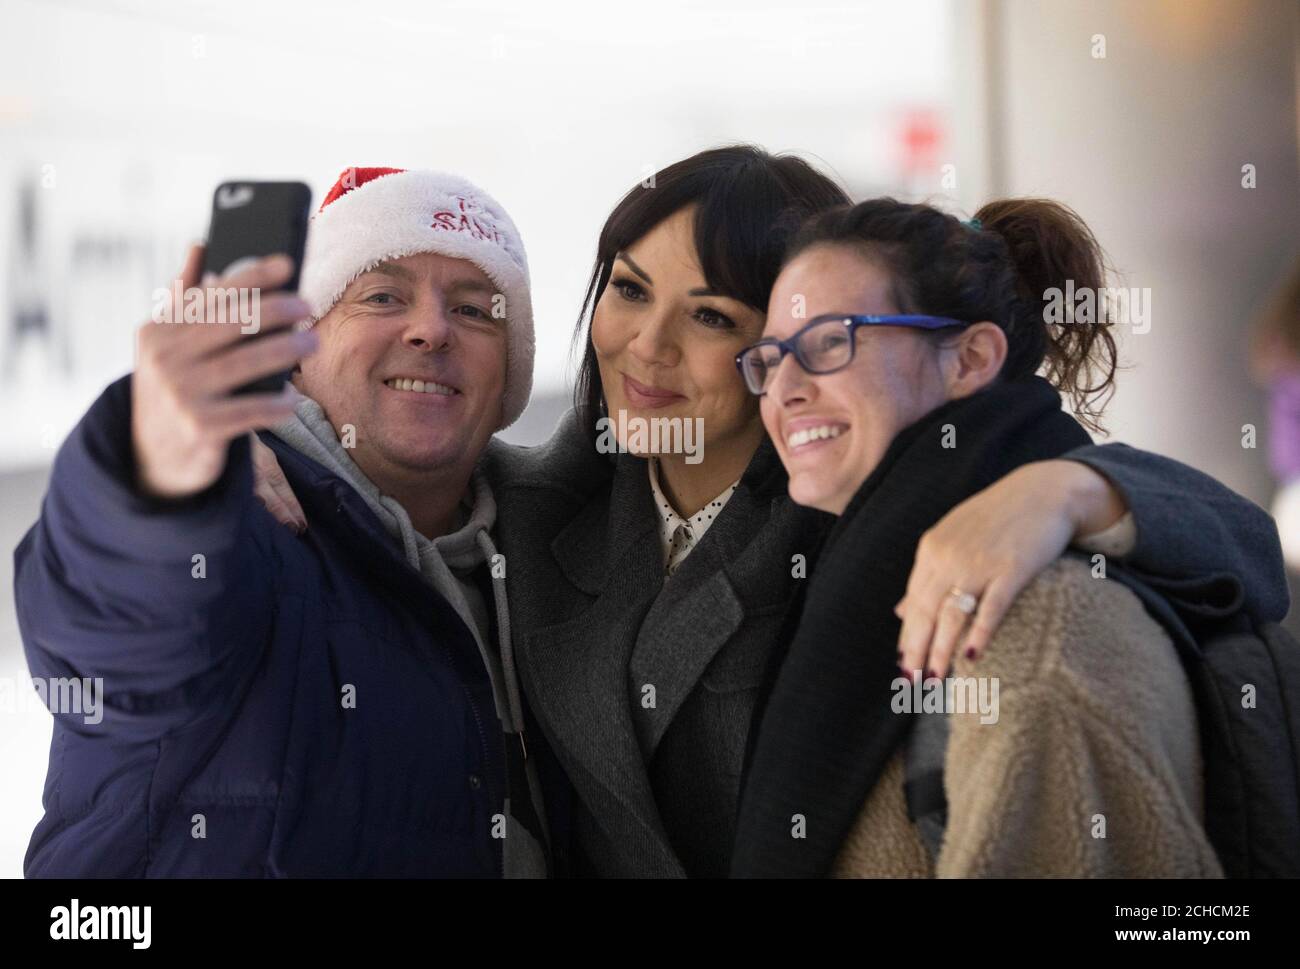 EDITORIAL USE ONLY Martine McCutcheon (centre) joins volunteers at Heathrow Airport to welcome home passengers for Christmas with their own ÔLove Actually' moment, ahead of the airport's busiest week for arrivals, Middlesex. PRESS ASSOCIATION. Photo. Picture date: Tuesday December 19, 2017. Family and friends can direct message @Heathrowairport on Twitter to arrange for a loved one to have a personalised welcome when they arrive into the airport if they can't be there in person this Christmas. Photo credit should read: David Parry/PA Wire Stock Photo